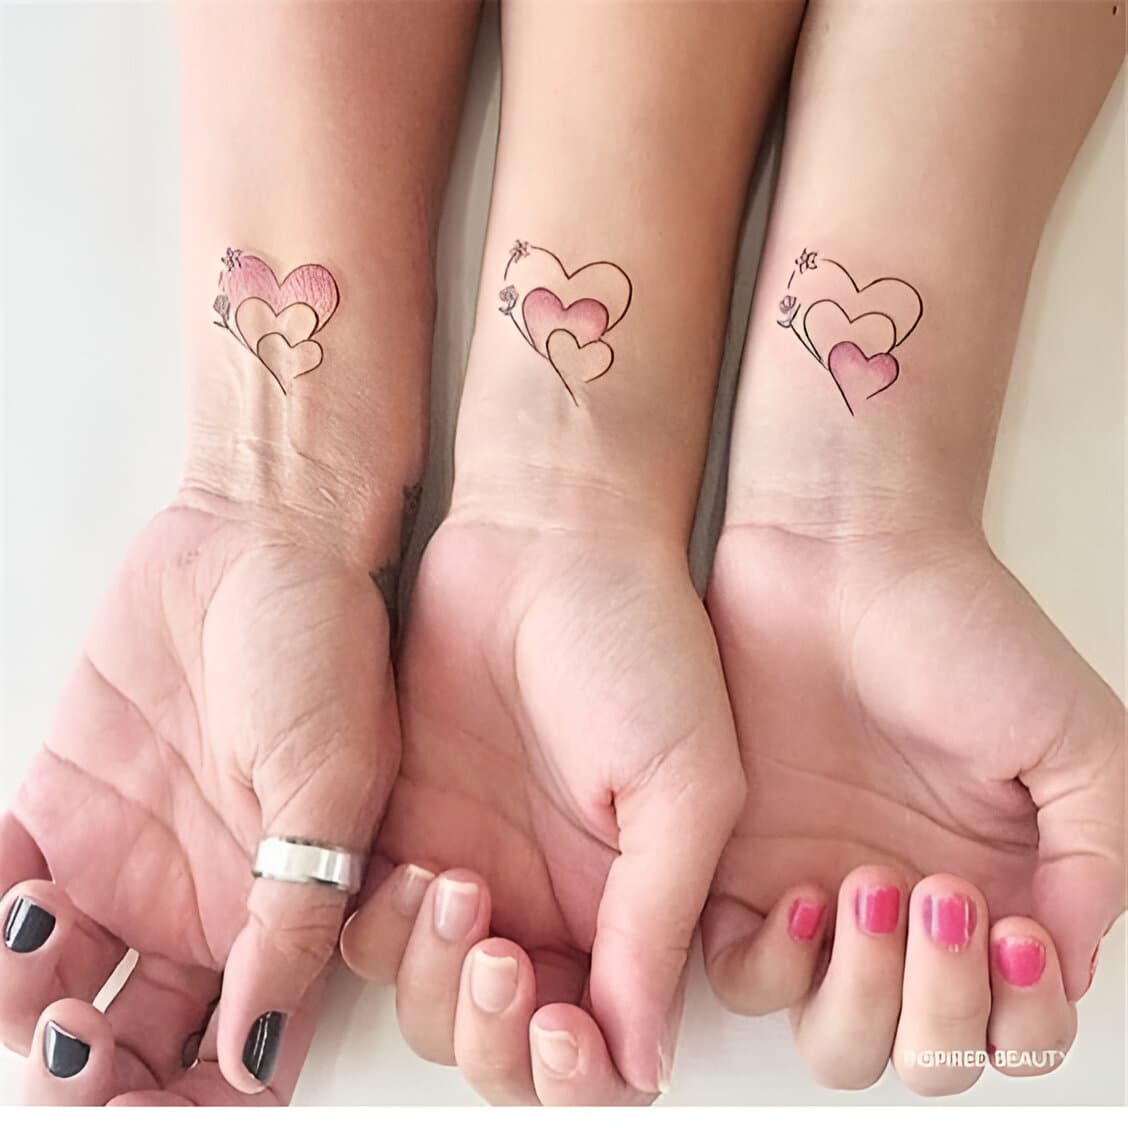 30 Elegant Matching Heart Tattoos To Get With Your Partner ASAP 27